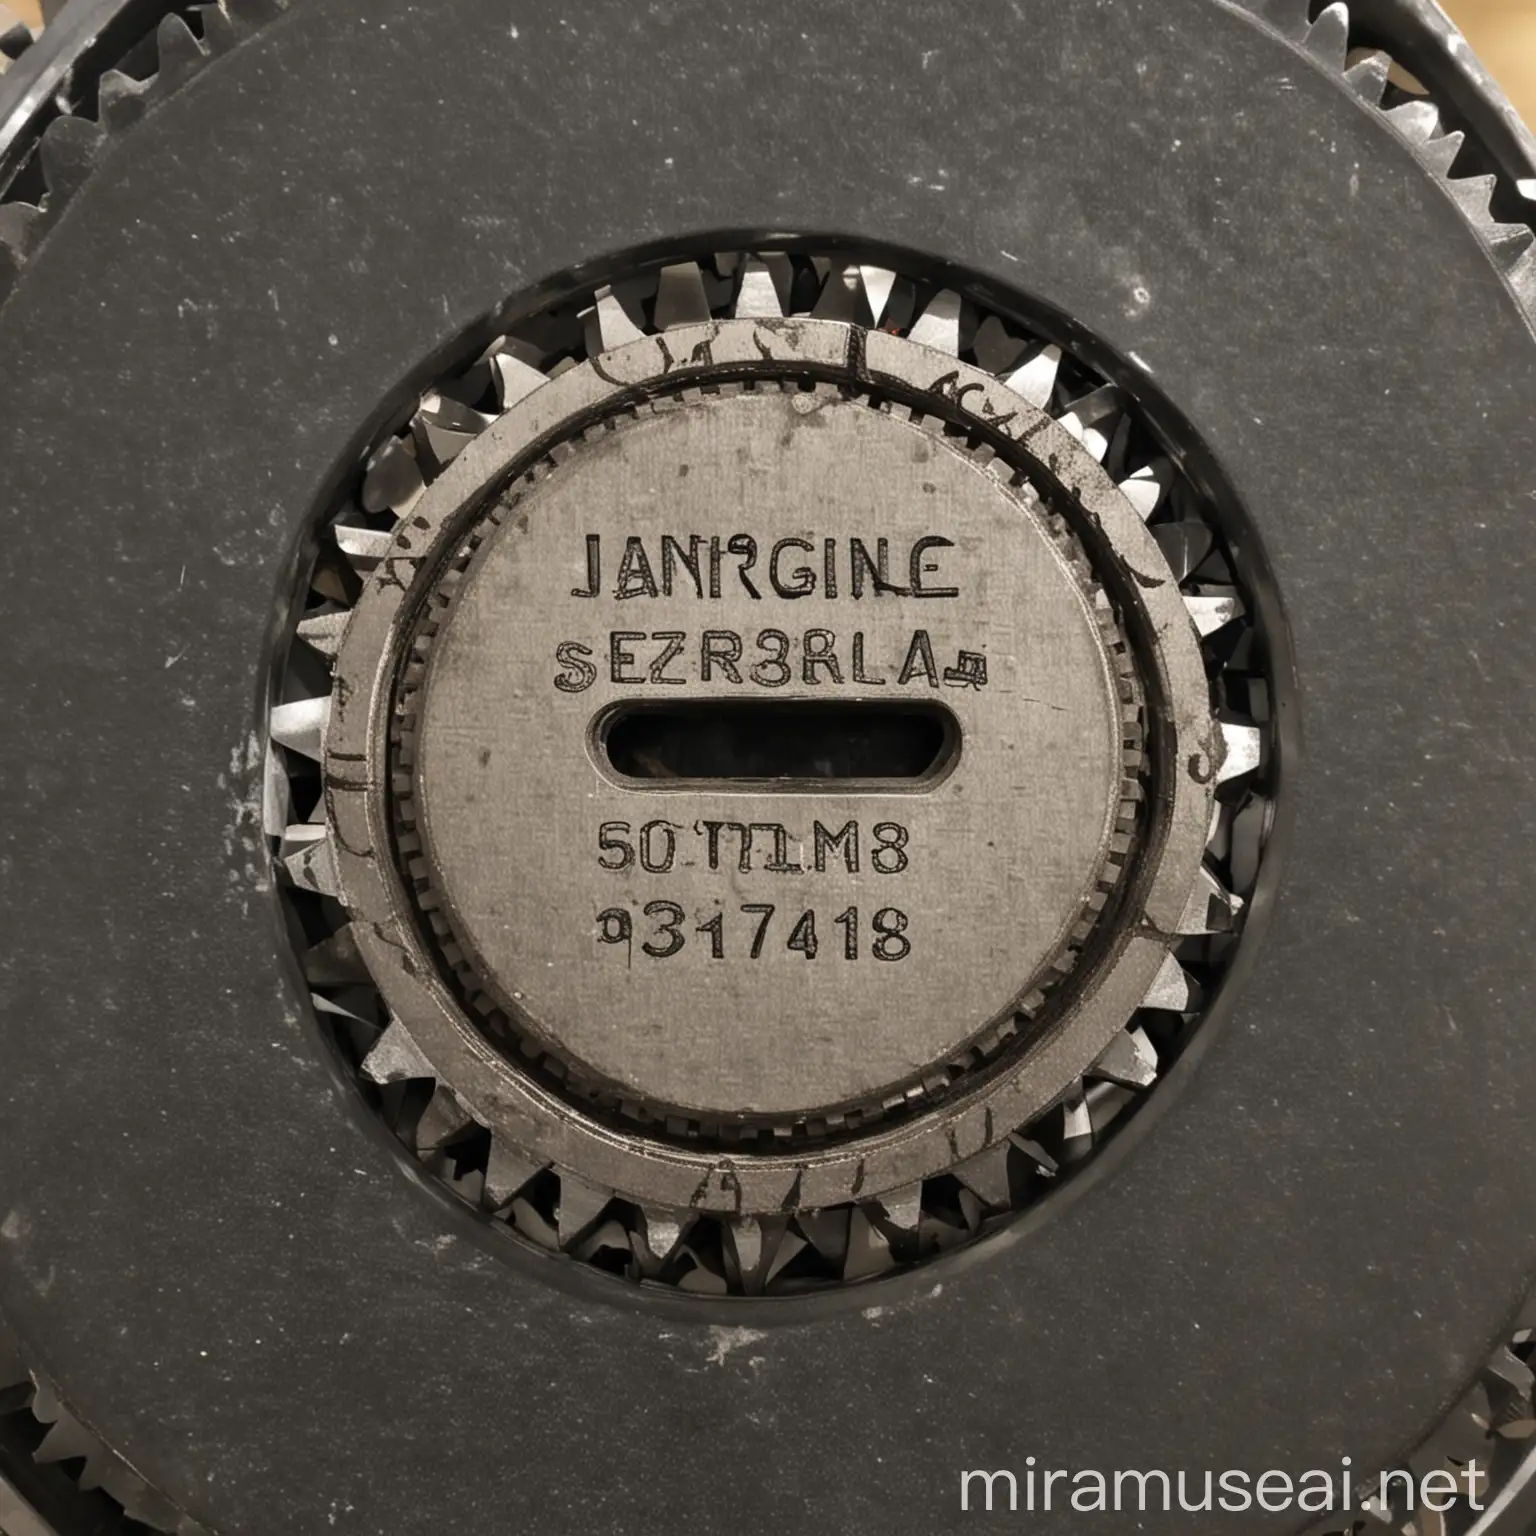 serial number on a small gear